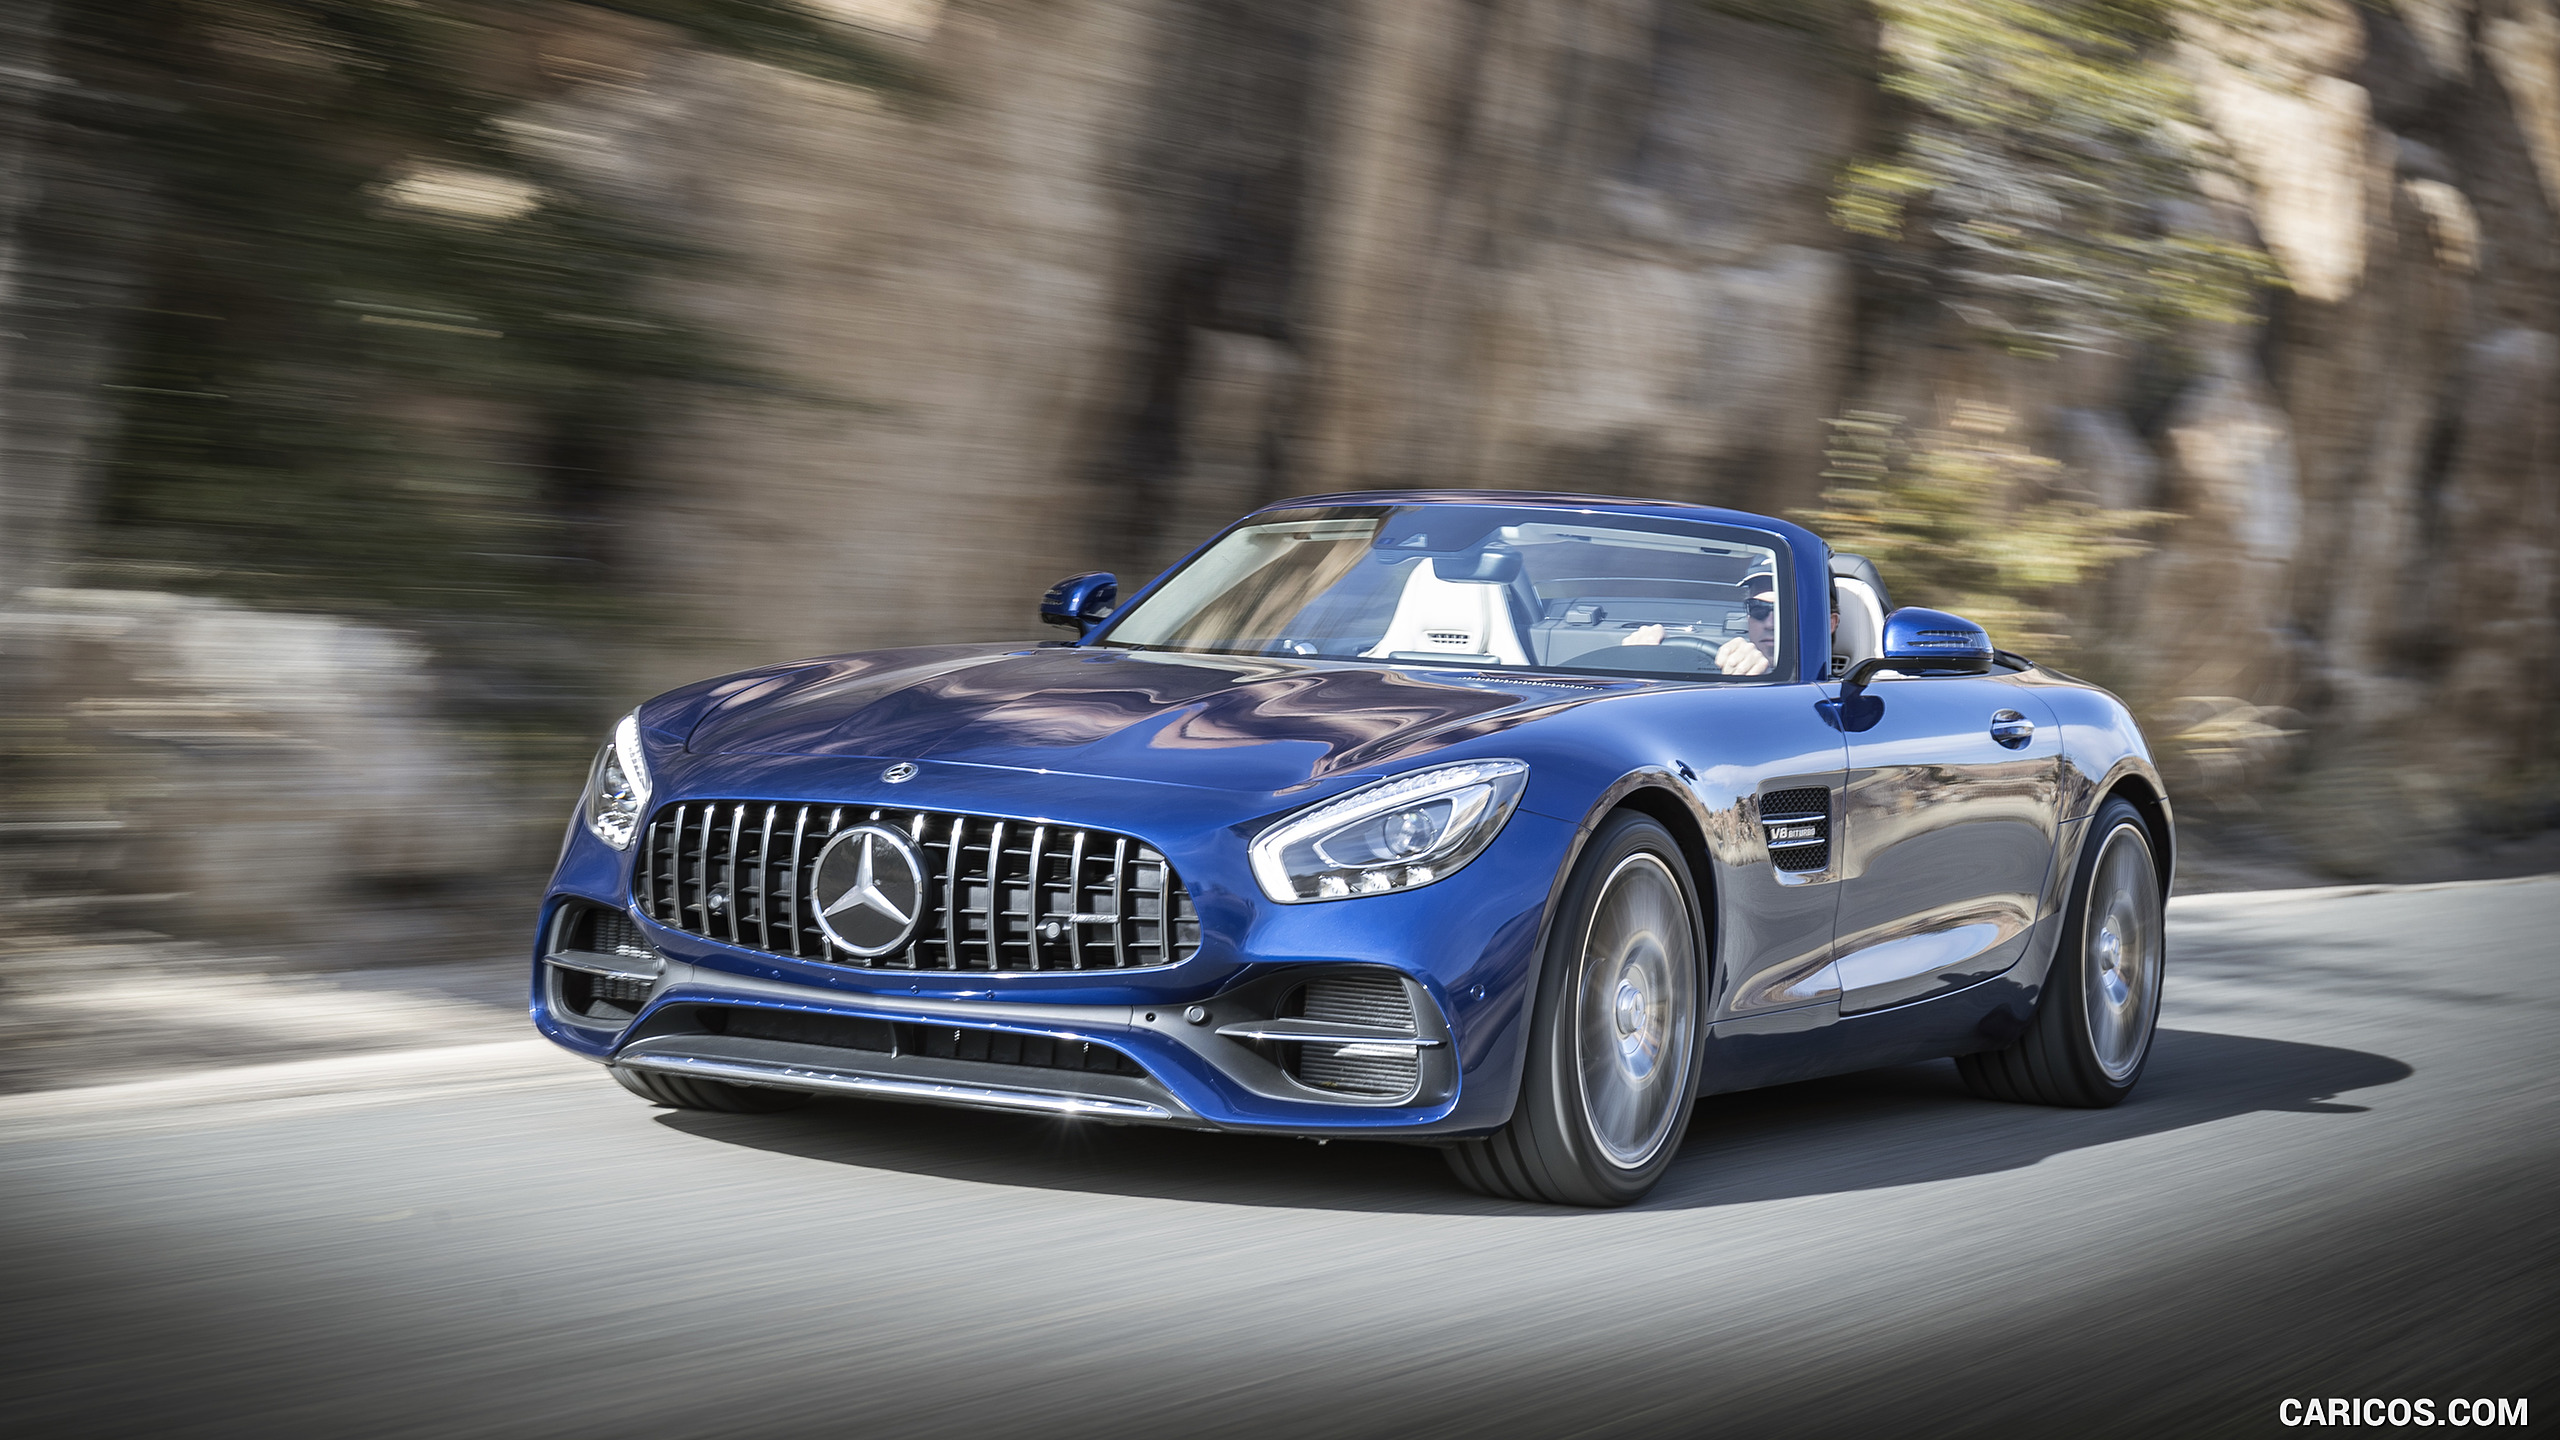 2018 Mercedes-AMG GT Roadster - Front Three-Quarter, #134 of 350